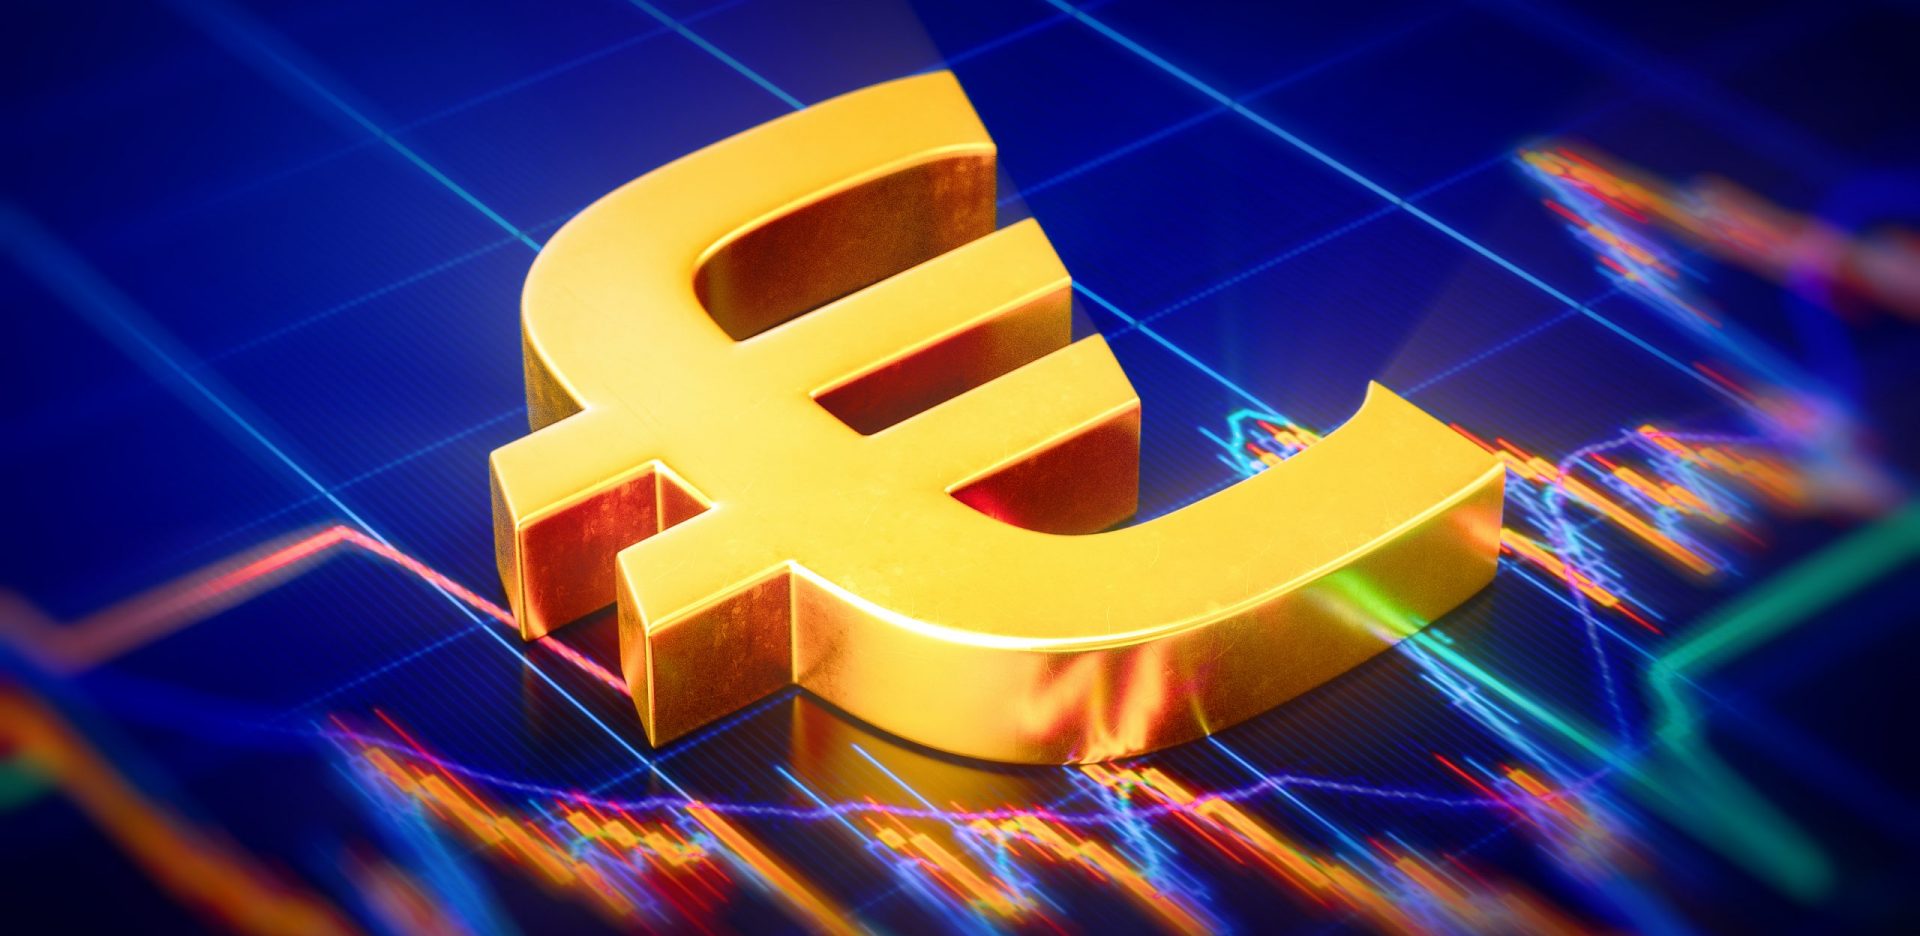 Conceptual image with a golden euro sign and stock graphs in the background